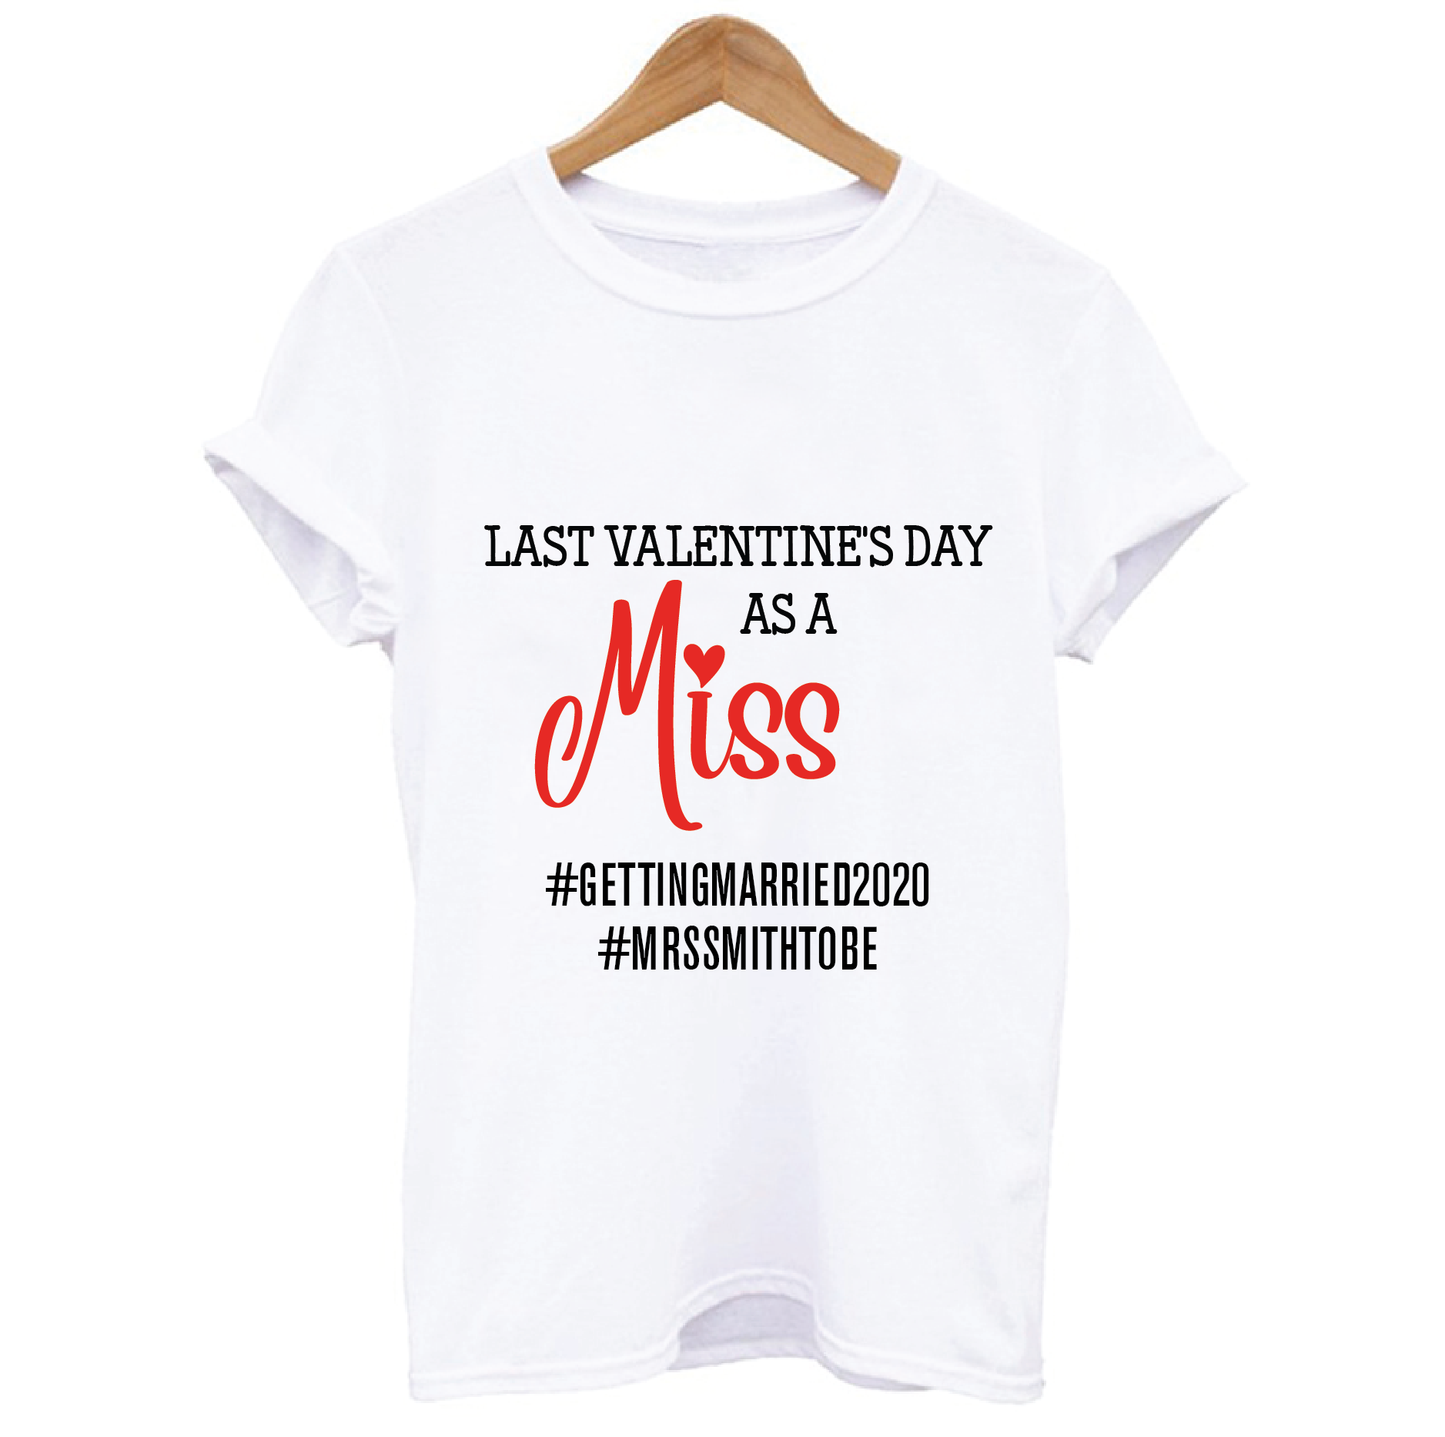 Last Valentine's Day as a Miss T-shirt